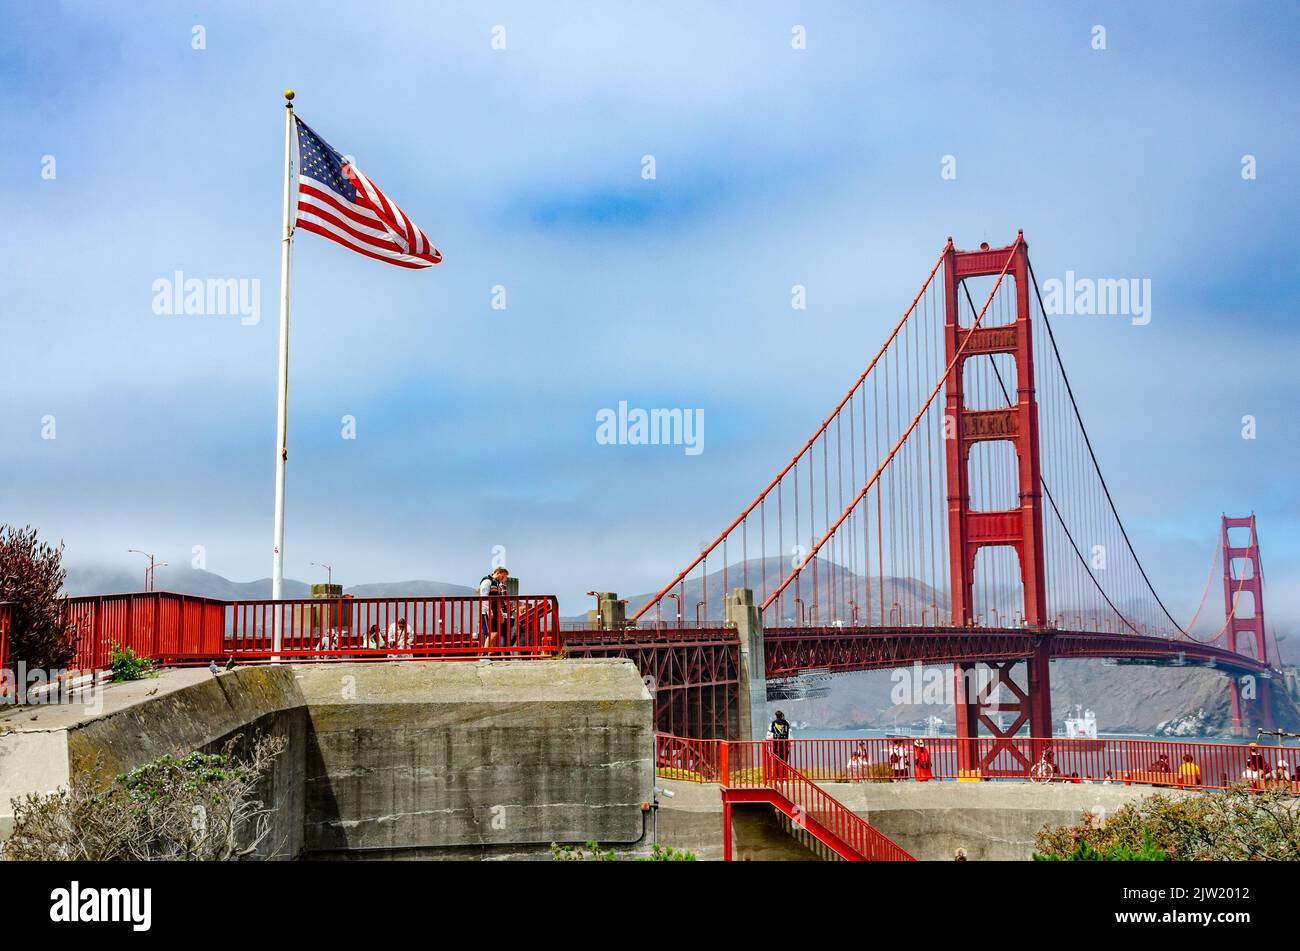 The Star Spangled Banner flag flies on a flagpole in the foreground with The Golden Gate Bridge in the background Stock Photo